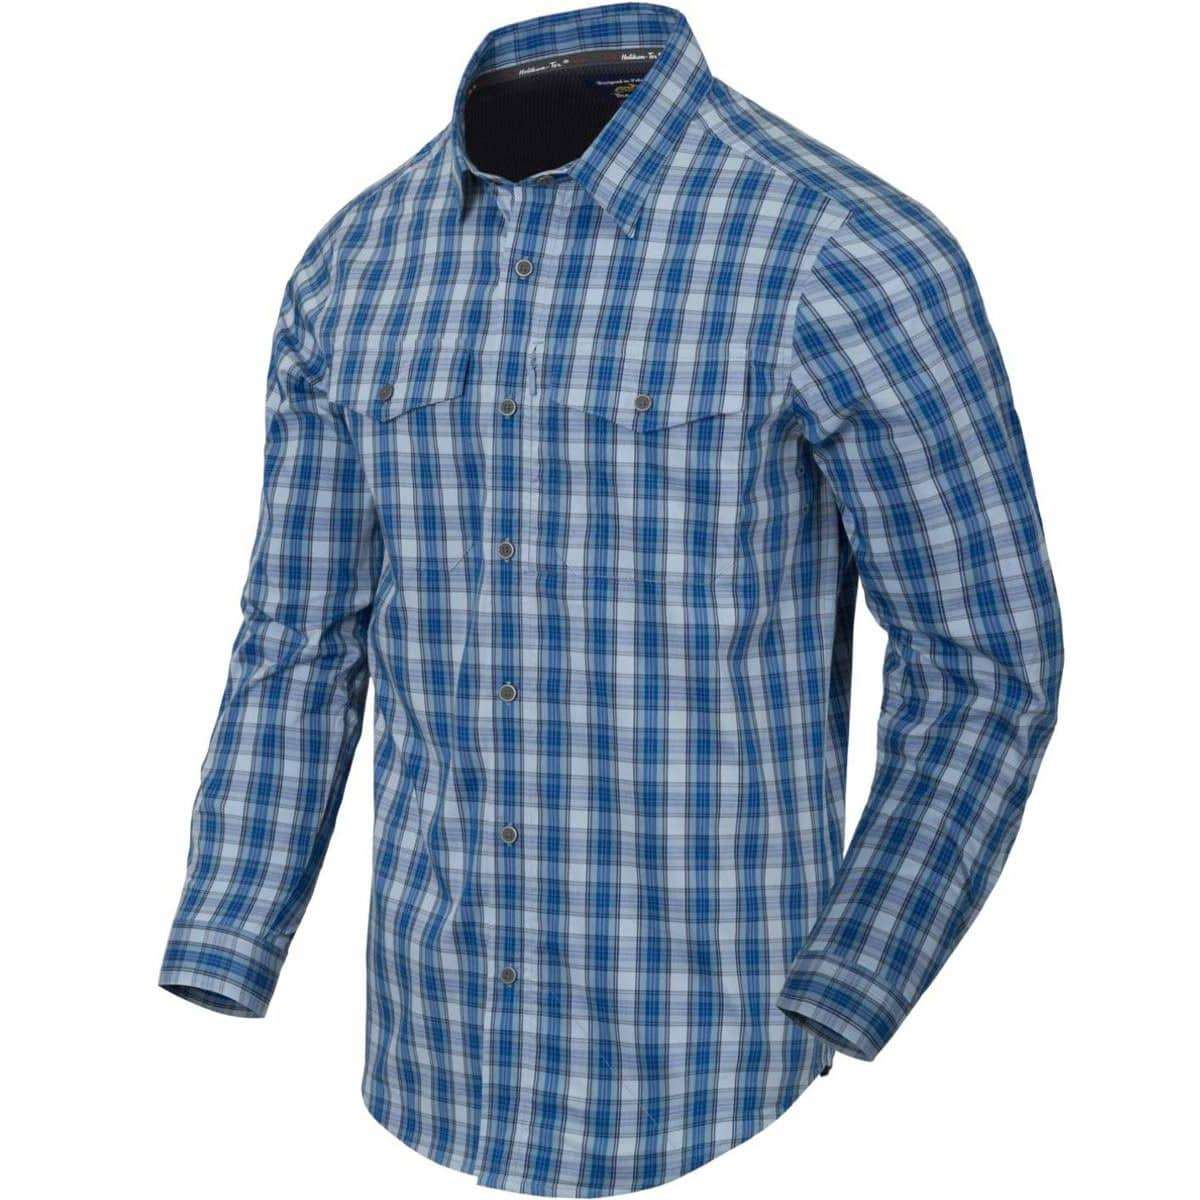 Helikon-Tex Covert Concealed Carry Men's Shirt